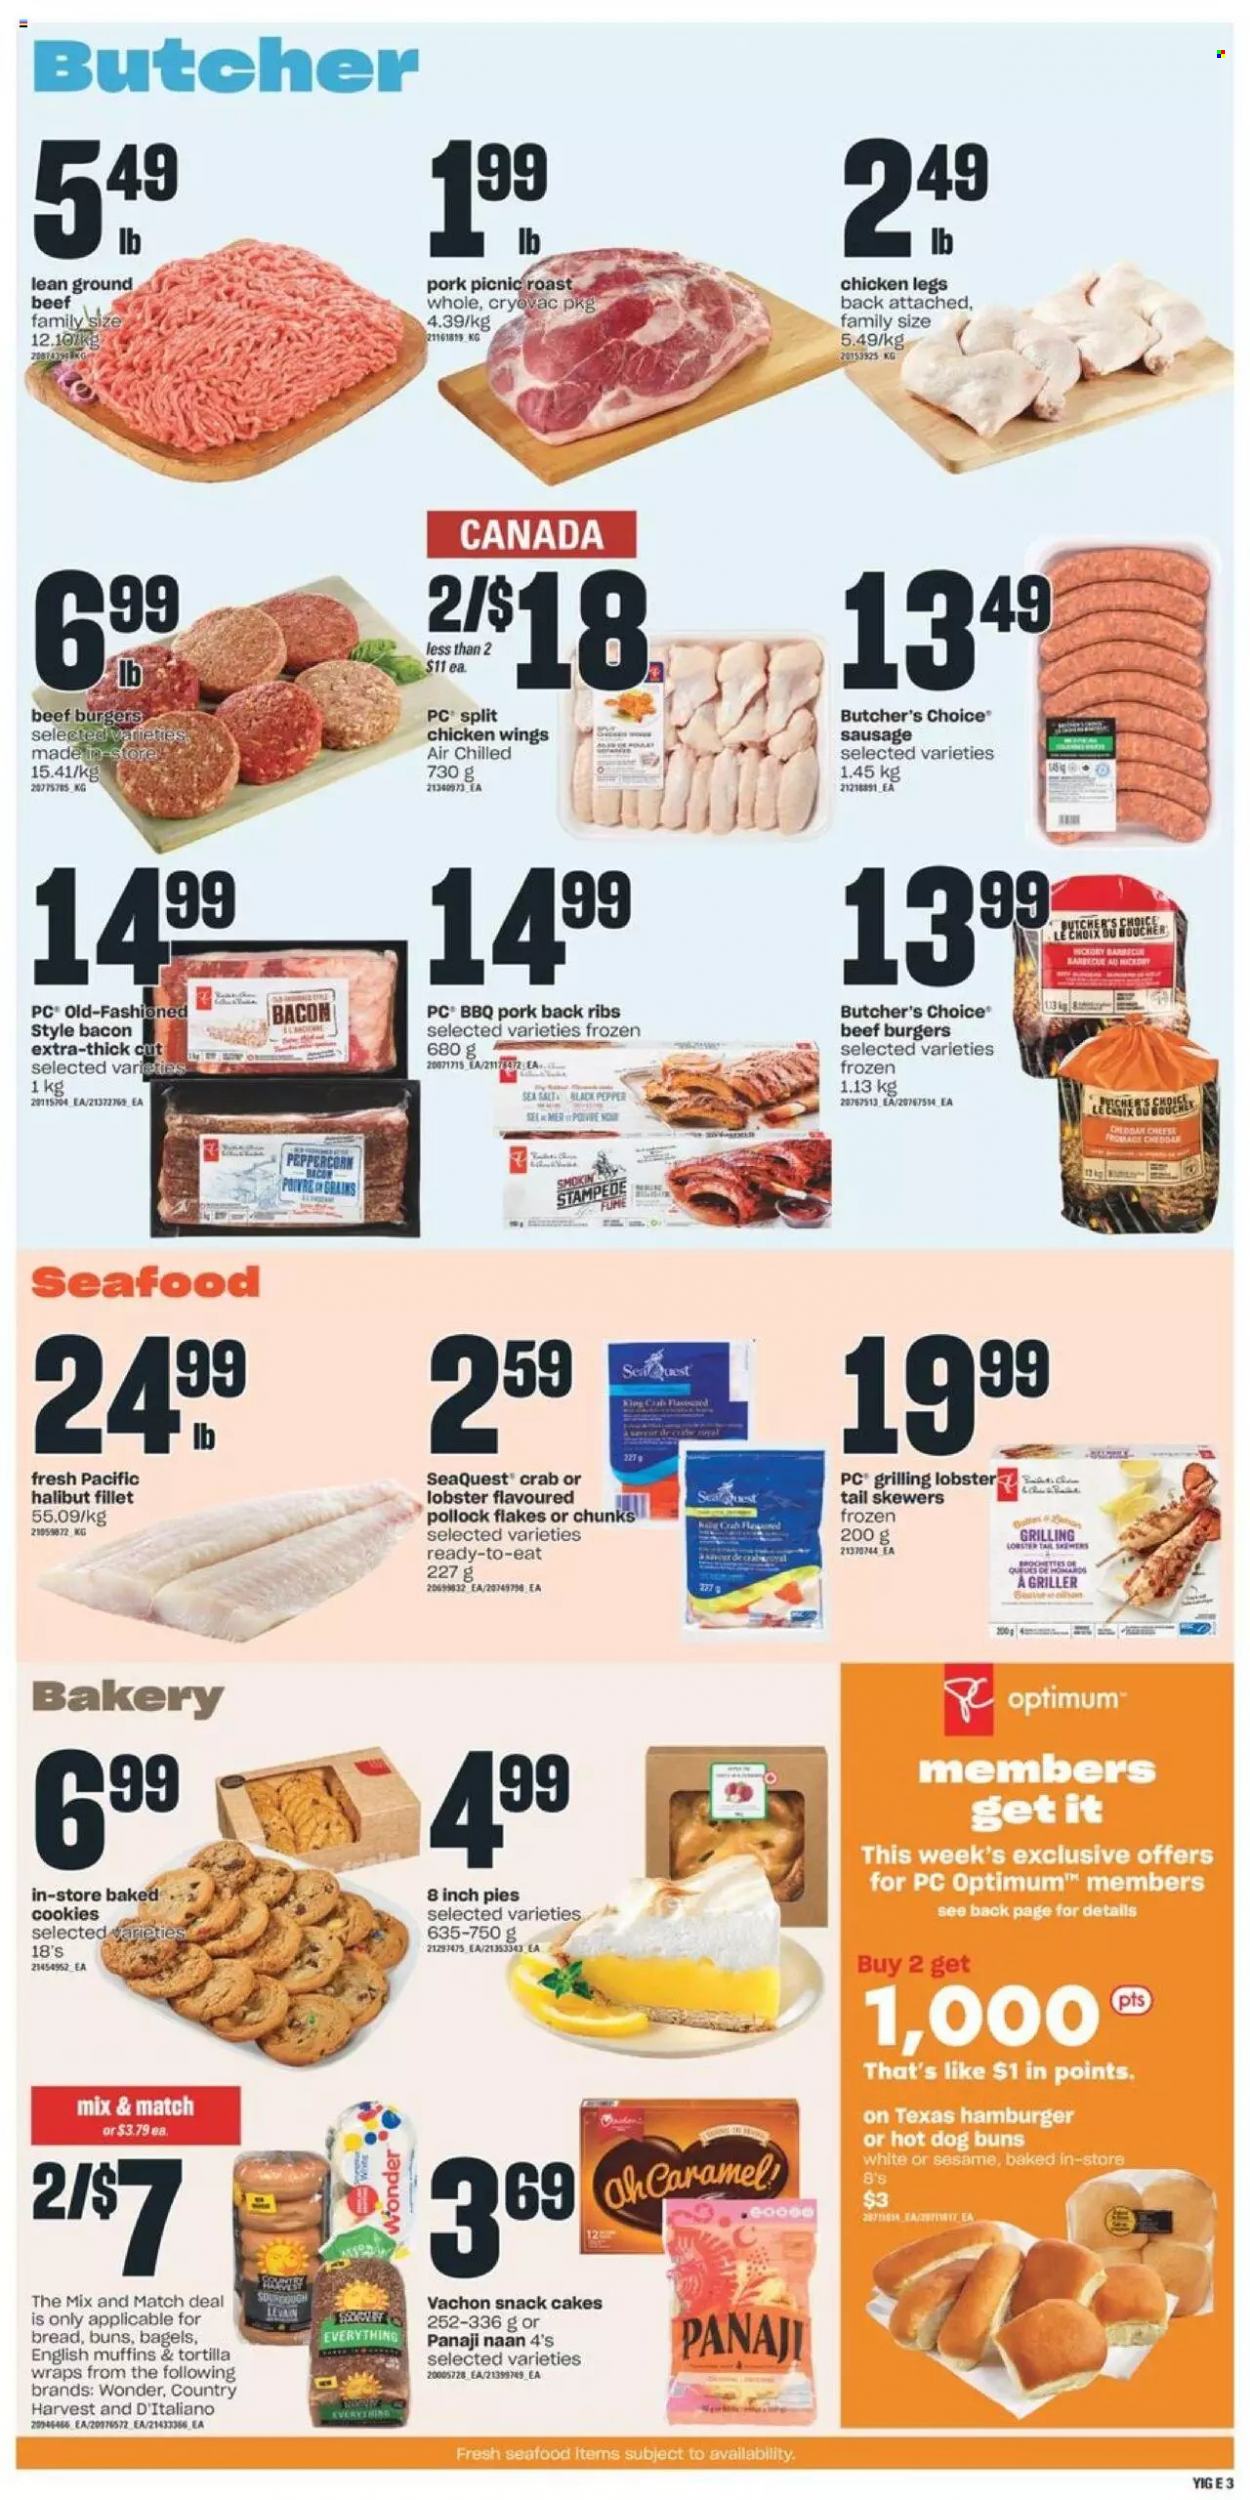 thumbnail - Independent Flyer - May 19, 2022 - May 25, 2022 - Sales products - bagels, english muffins, tortillas, cake, buns, wraps, lobster, halibut, pollock, seafood, crab, lobster tail, beef burger, sausage, cheese, Country Harvest, chicken wings, cookies, snack, sea salt, pepper, chicken legs, chicken, beef meat, ground beef, pork meat, pork ribs, pork back ribs, Optimum. Page 4.